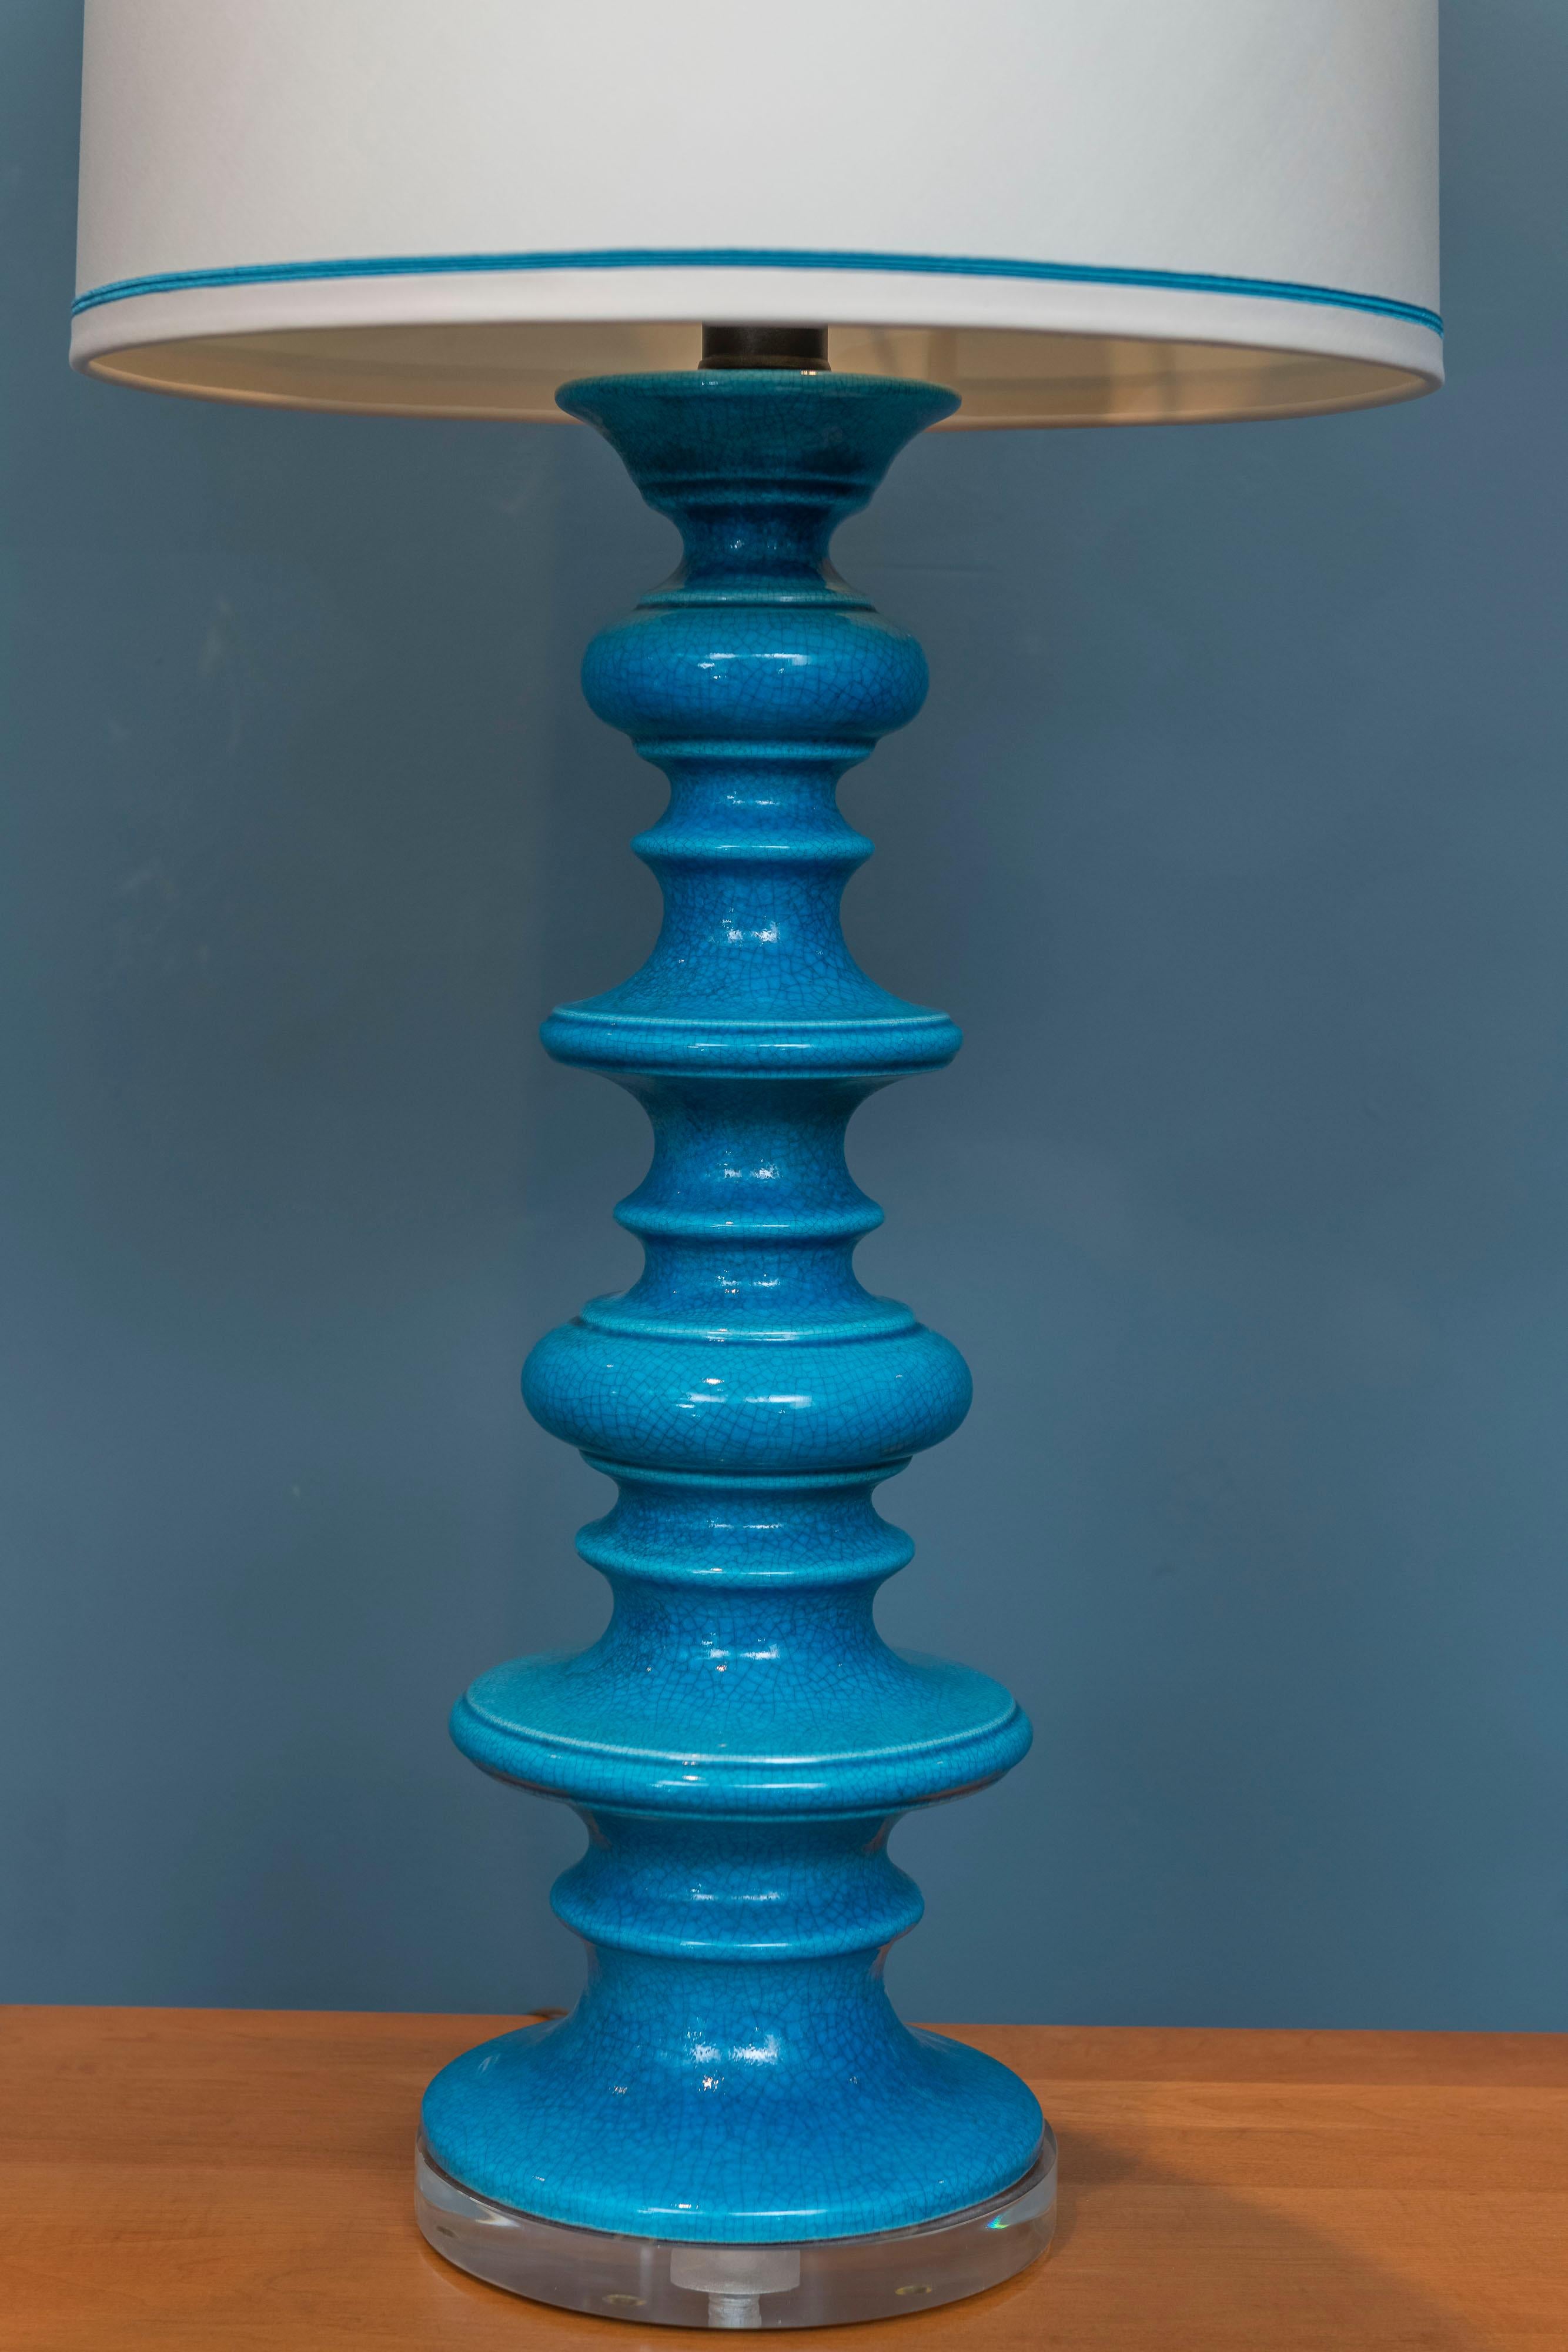 Mid-Century Modern Italian ceramic table lamp. Intoxicating turquoise color with a crackle glaze newly re-wired on a later acrylic base.